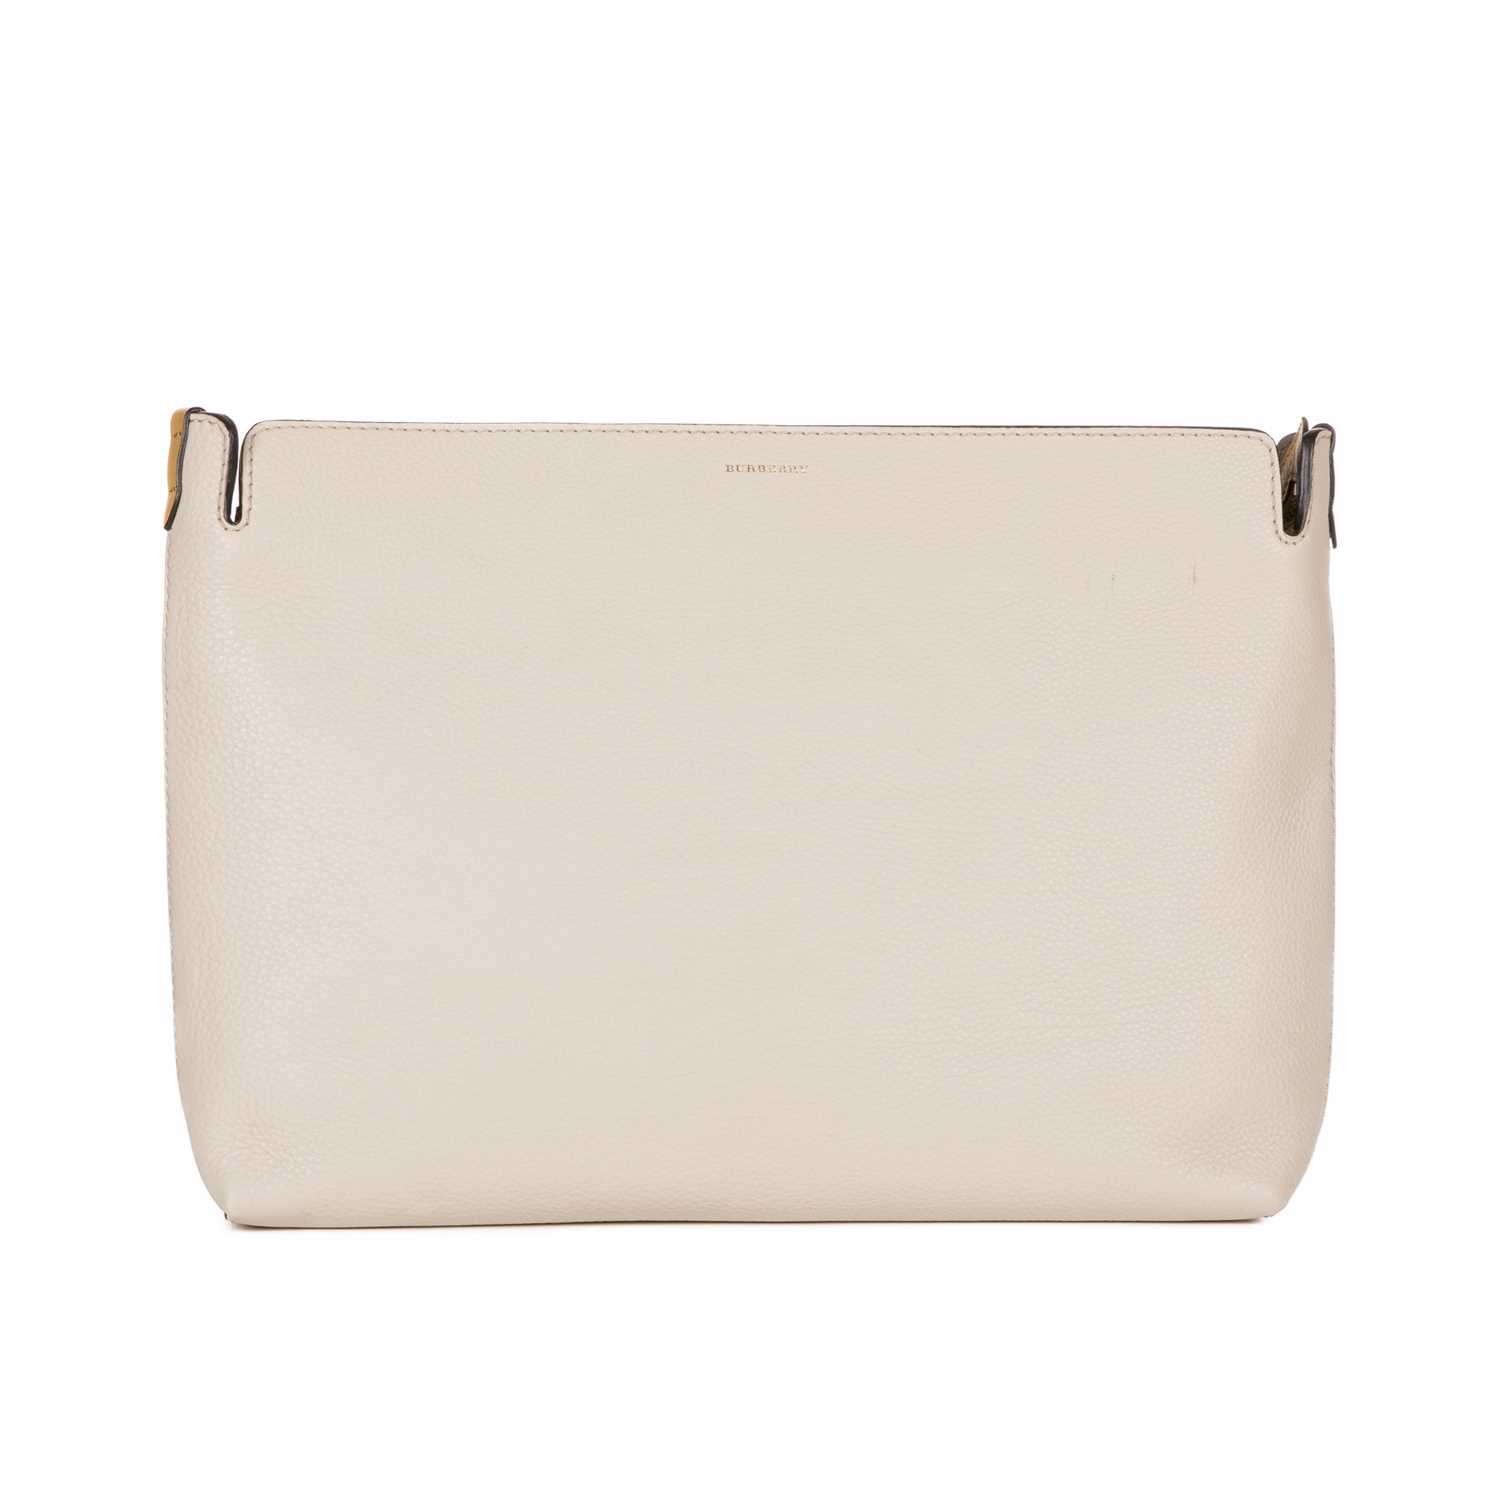 Burberry, a large bicolour clutch bag, crafted from pale grey and pale mustard leather, with a top